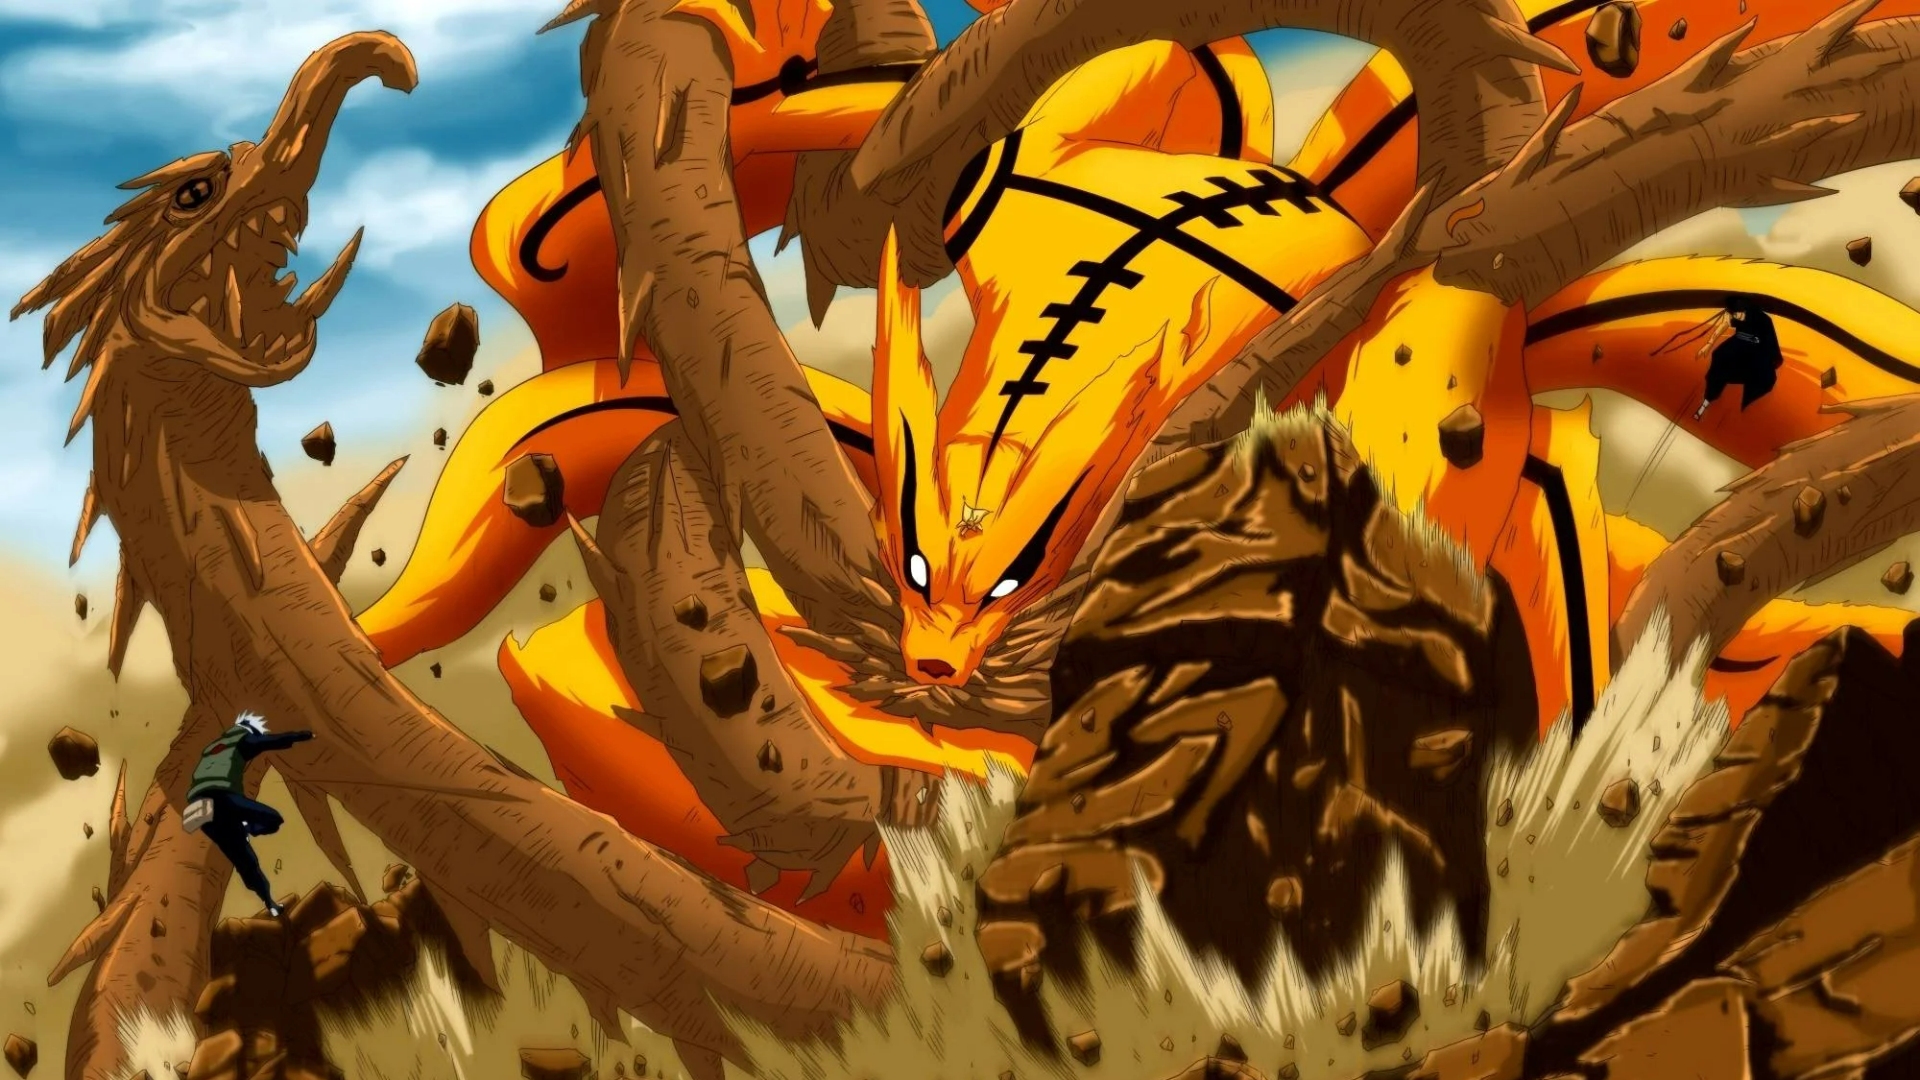 NINE TAILED FOX Backgrounds